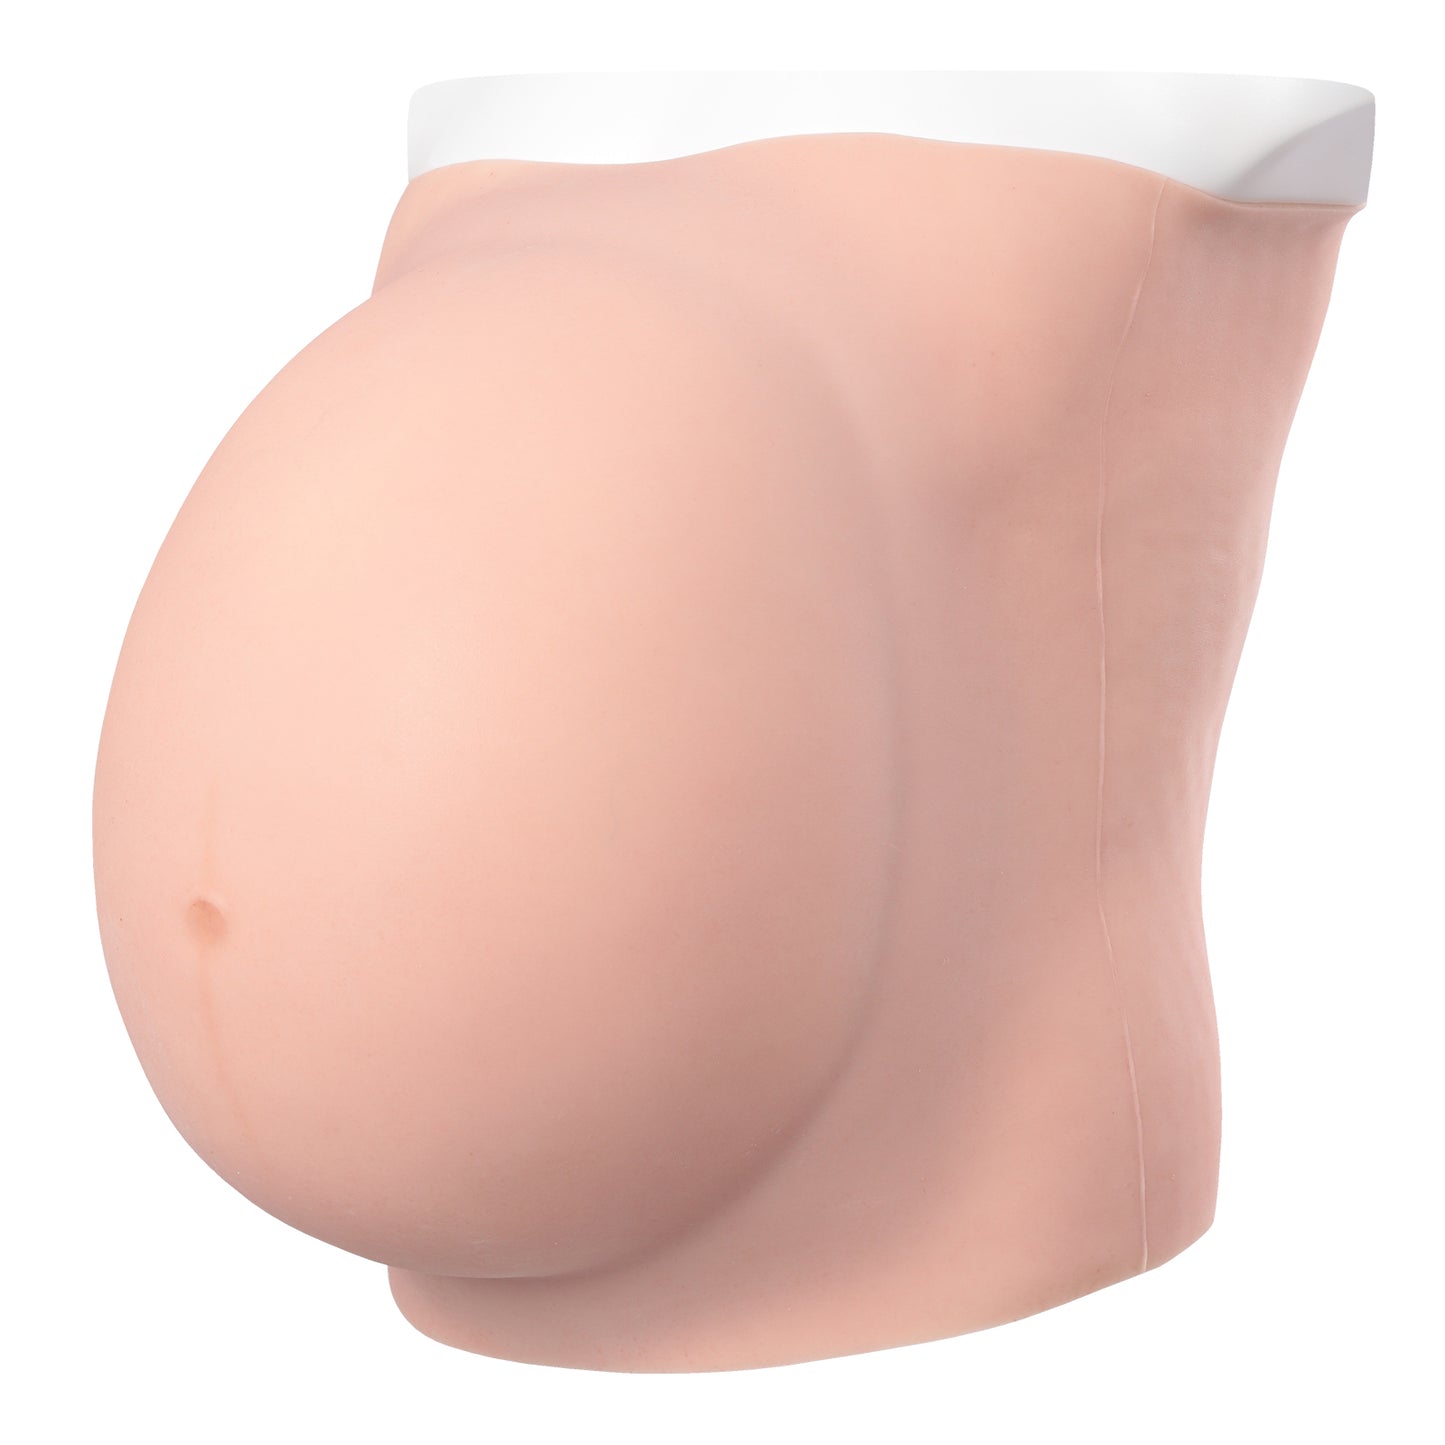 Silicone Fake Pregnant Belly Realistic Pregnant Tummy For Crossdresser Cosplay Unisex